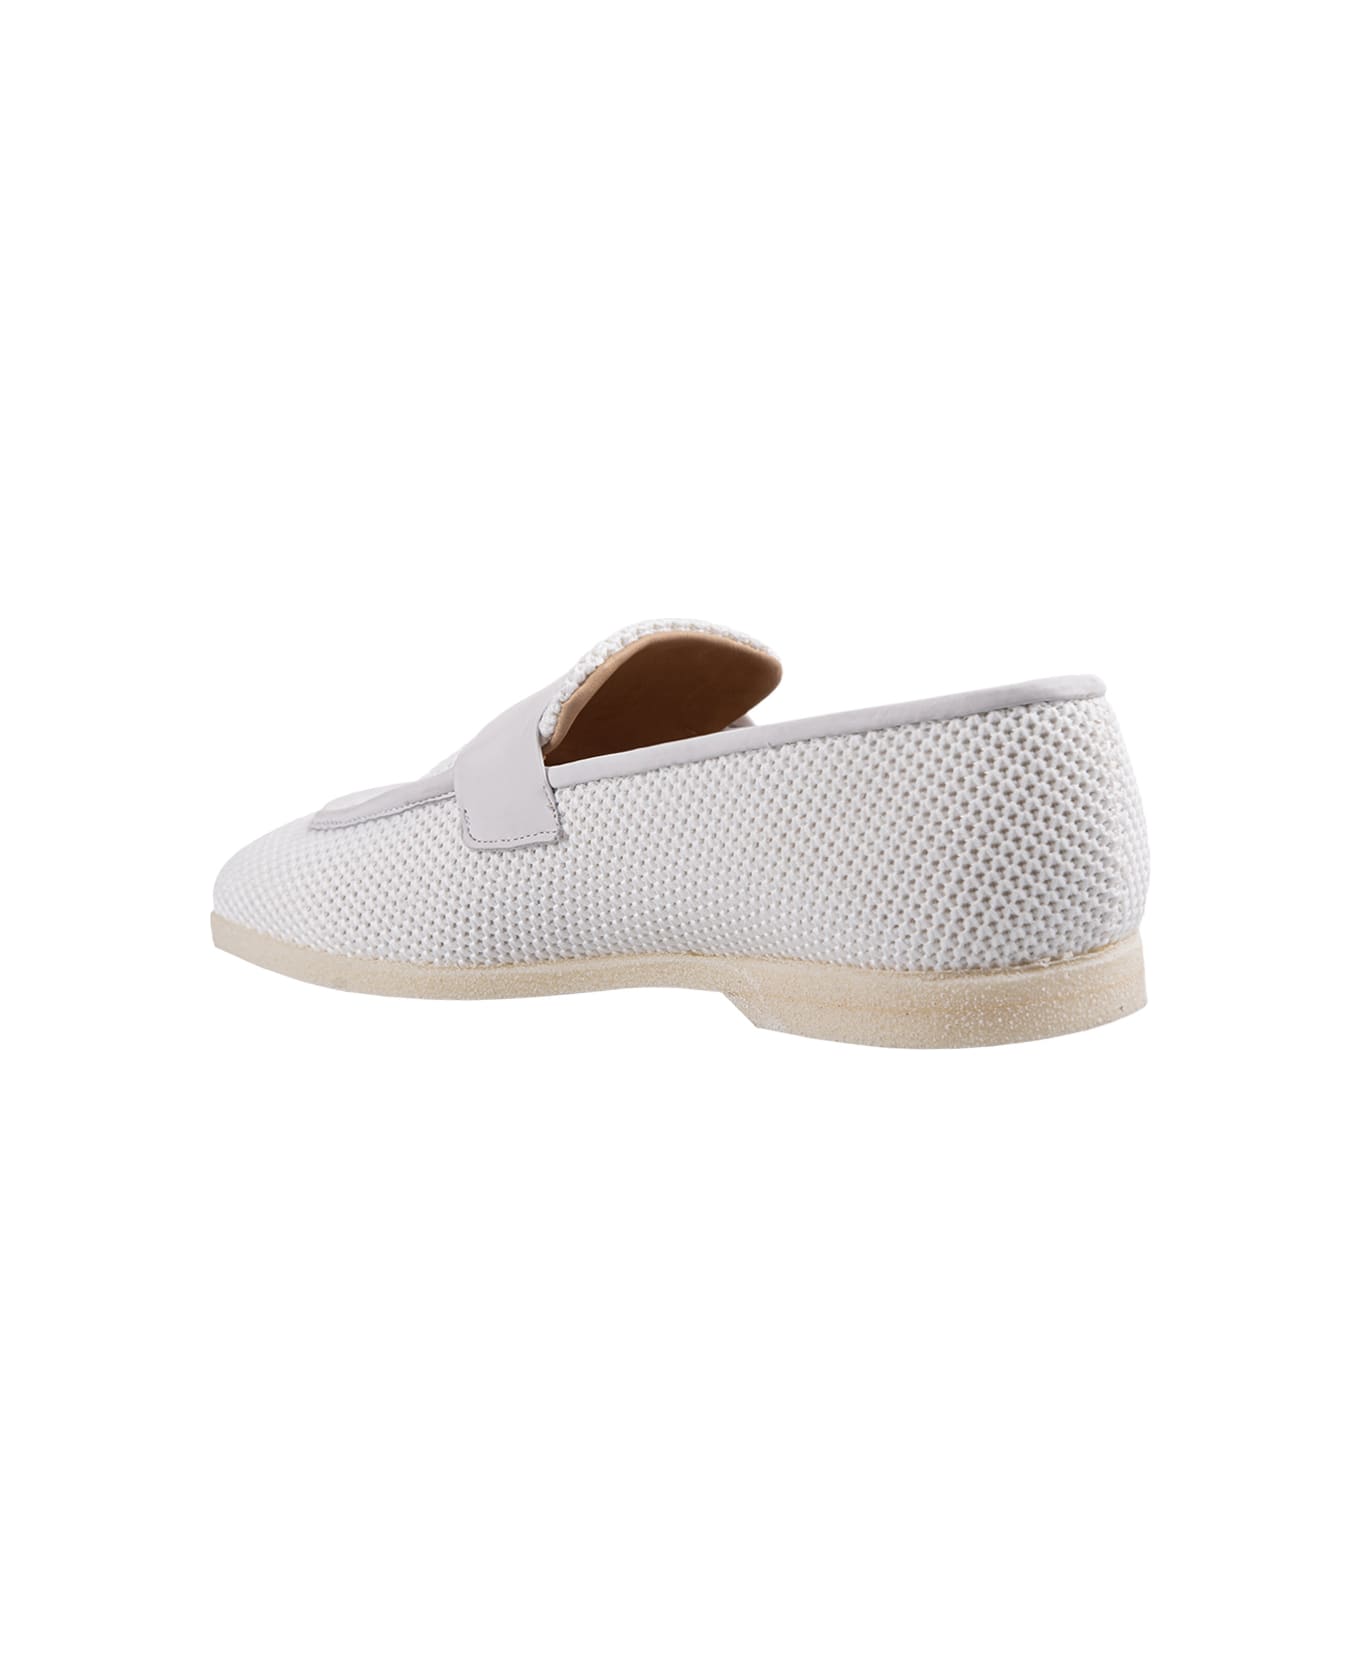 Kiton White Perforated Loafer With Embossed Monogram - Bianco